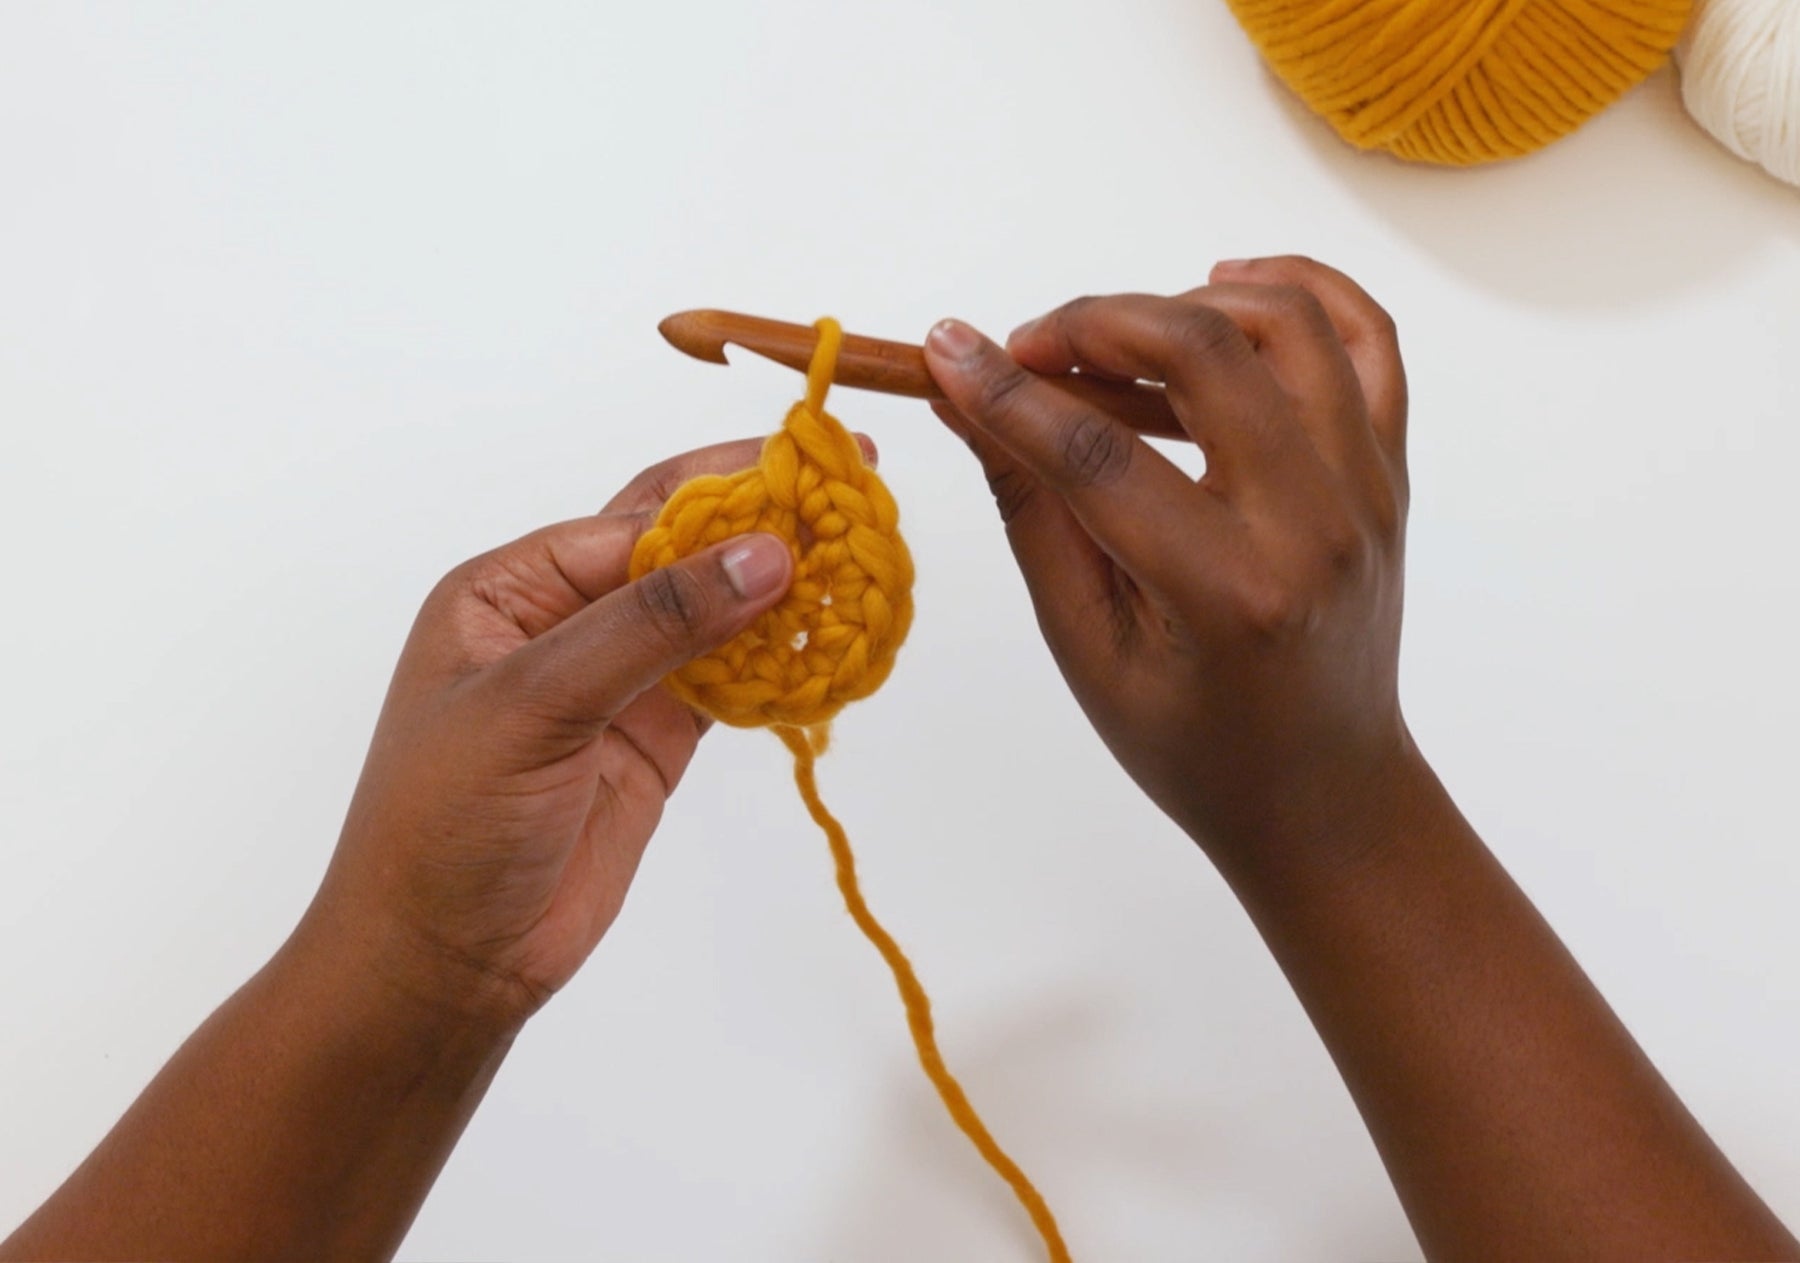 4 Ways to Hold Your Yarn When Crocheting - Crochet Tutorial